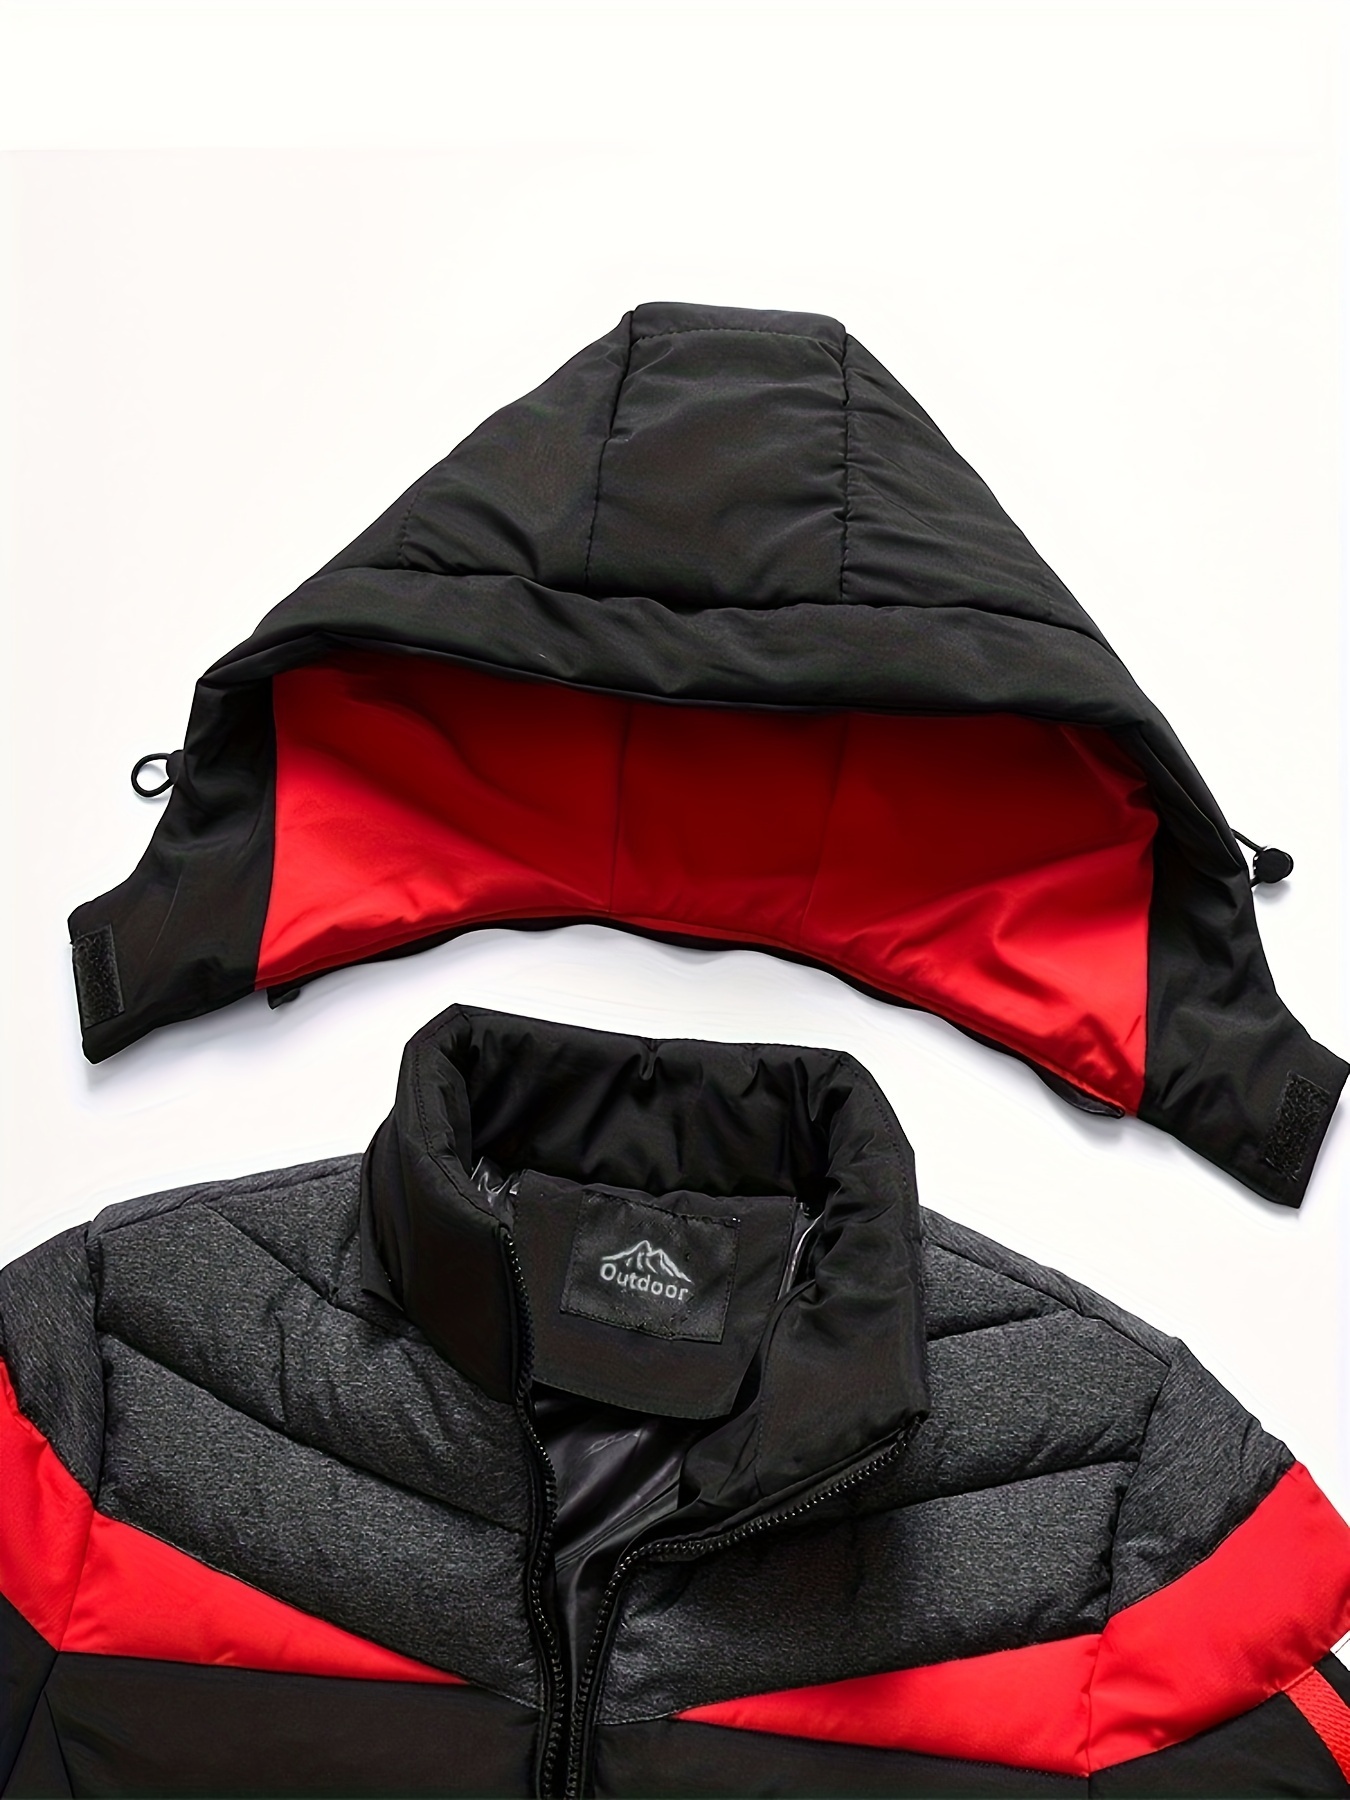 Patchwork Sleeved Long Color Hooded Autumn&Winter Solid Cotton Men's Men's  Sleeping Bag Jacket (Red, M)